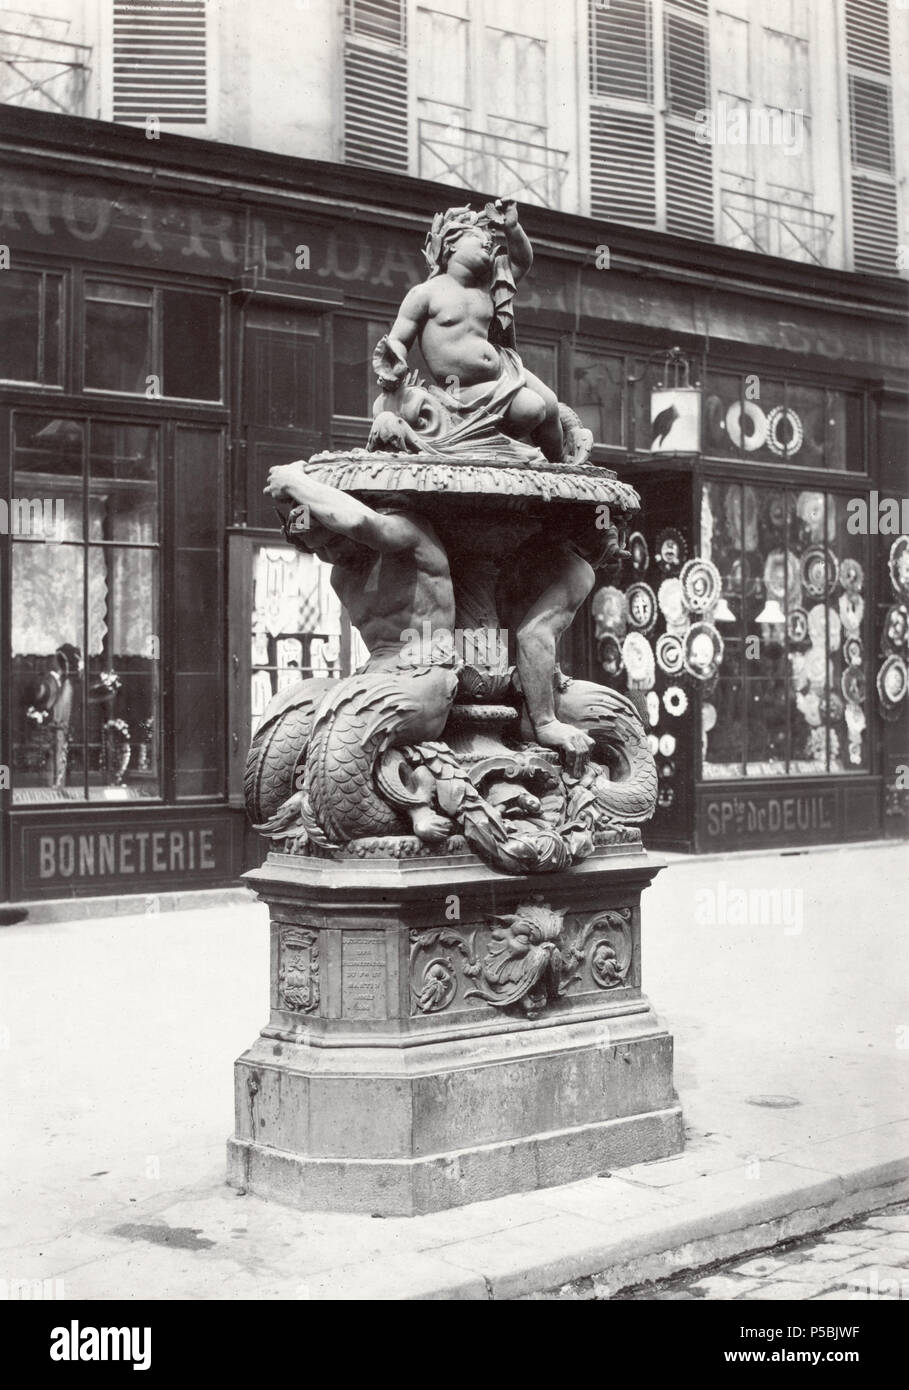 Fontaine No. 1 Rue du Fbg. [i.e. Faubourg] St Martin (fonte). No. 16. English: Cast iron fountain on curb of city street, plinth supportingmale figures with fish tails supporting bowl holding a child figure with shells. Inscription on plinth. Shop front in background. circa 1865. N/A 327 Charles Marville, Fontaine No. 1 Rue du Faubourg-Saint-Martin, ca. 1865 Stock Photo